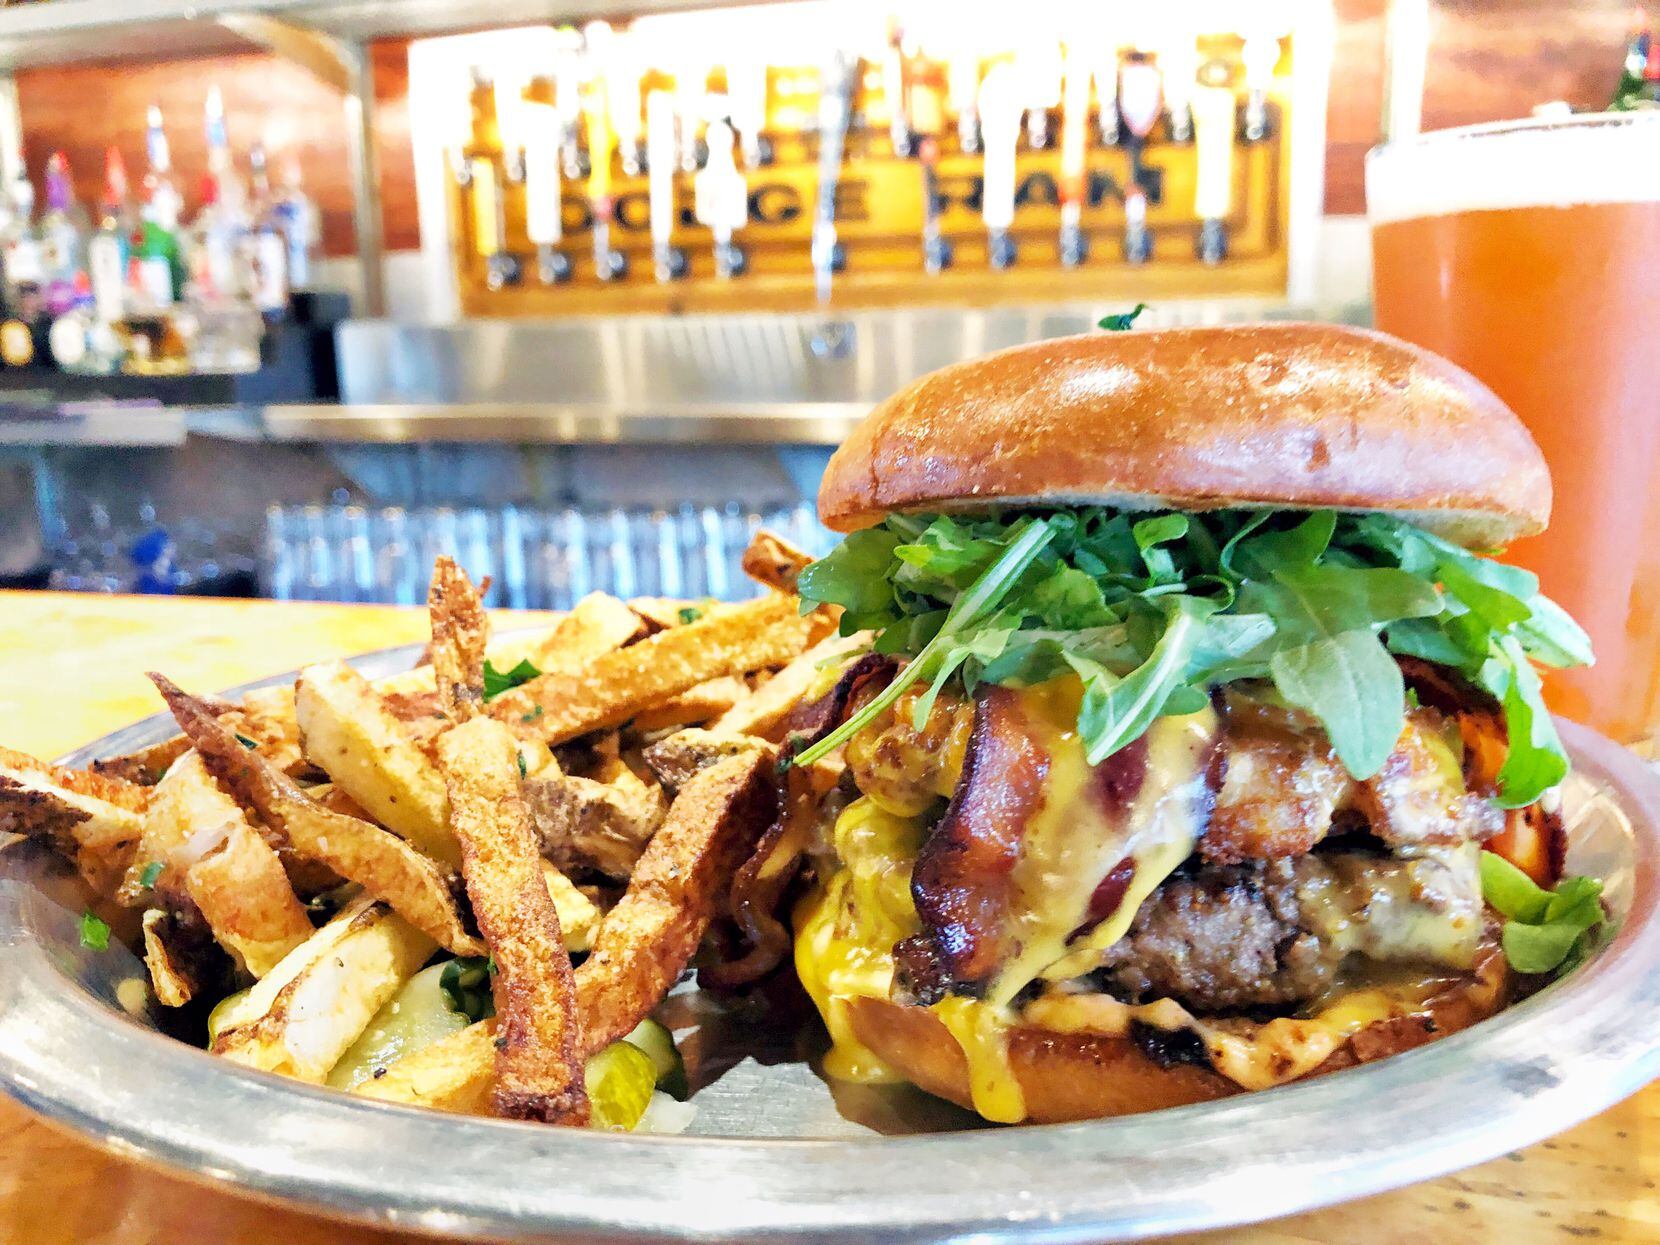 For Father's Day, Rodeo Goat locations will offer the Dad Bod Burger, a beef patty topped with a fried macaroni and cheese patty, bacon, mayo, arugula and pickles drizzled with queso.